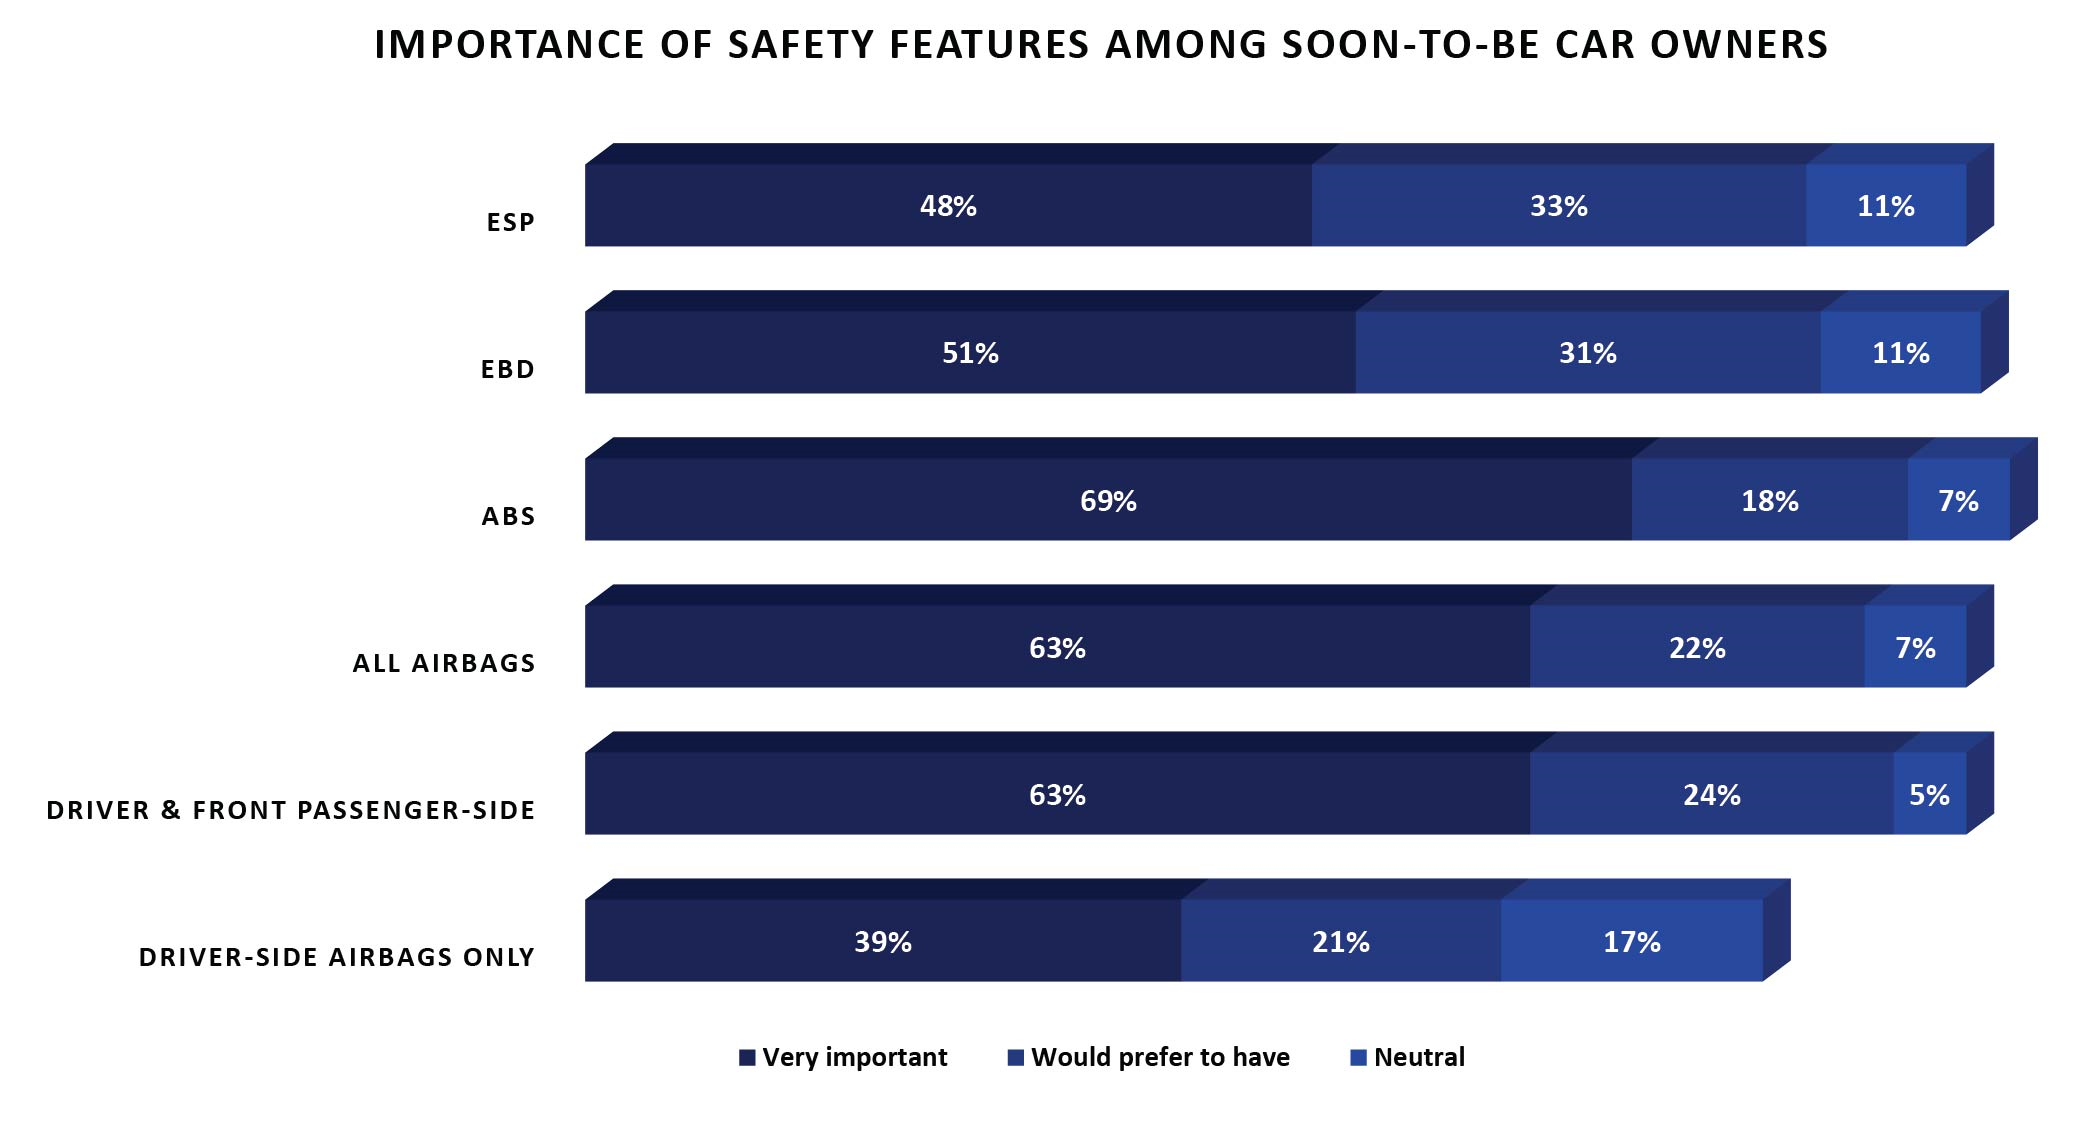 Importance of Safety Features Among Soon-To-Be Car Owners in Brazil